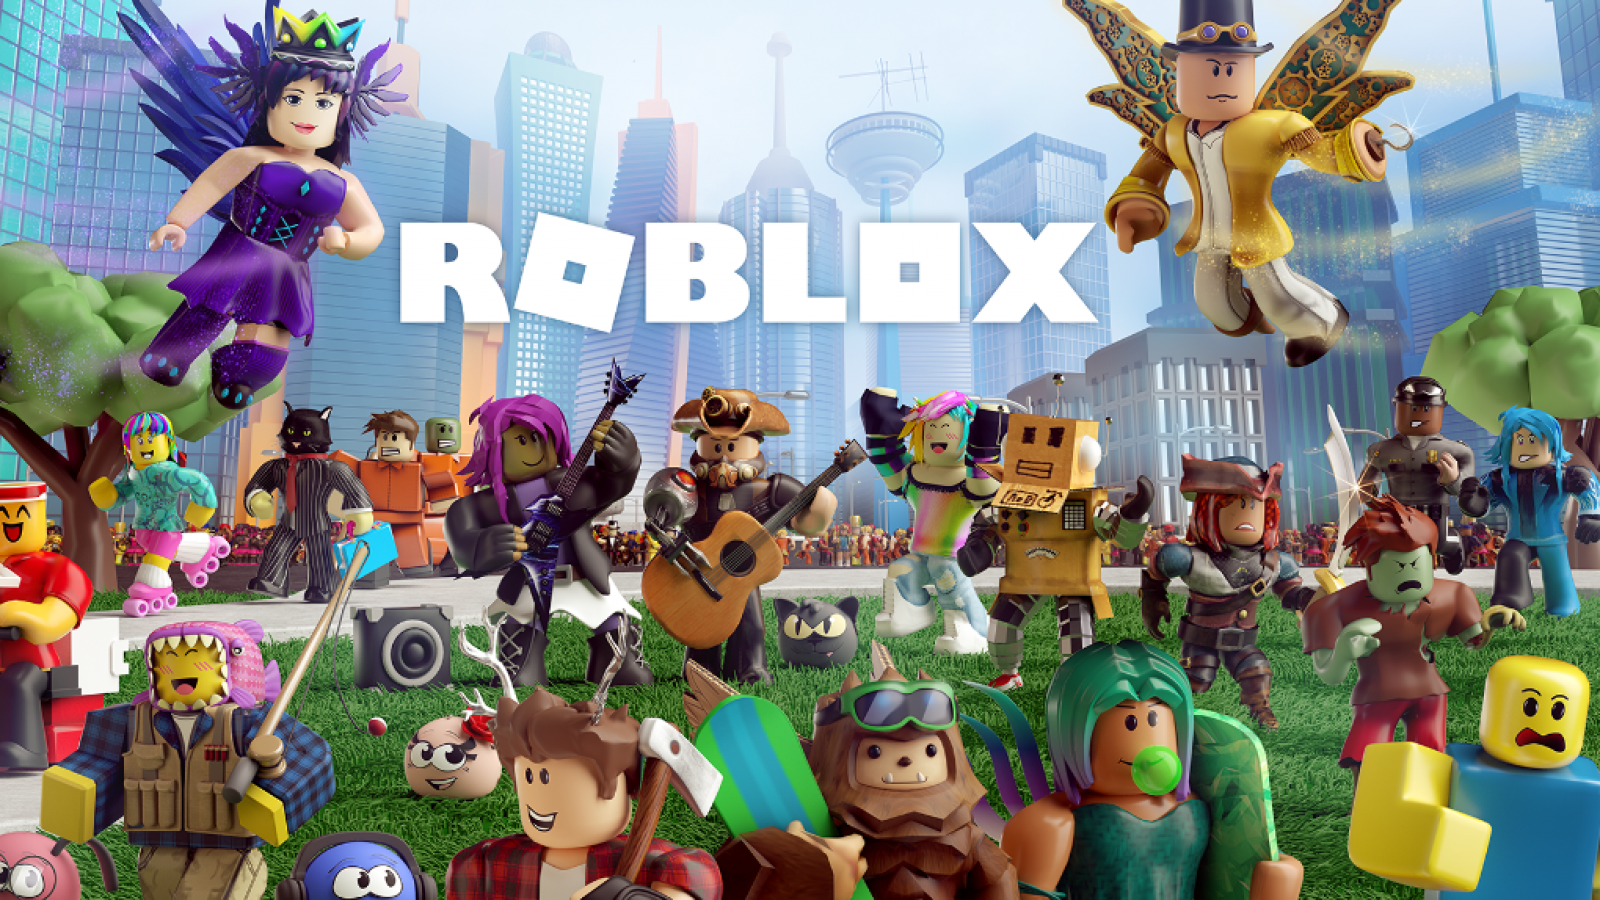 Esl Gaming Android 12 And Roblox Prepares To Ipo Master The Meta - roblox bounce umbrella